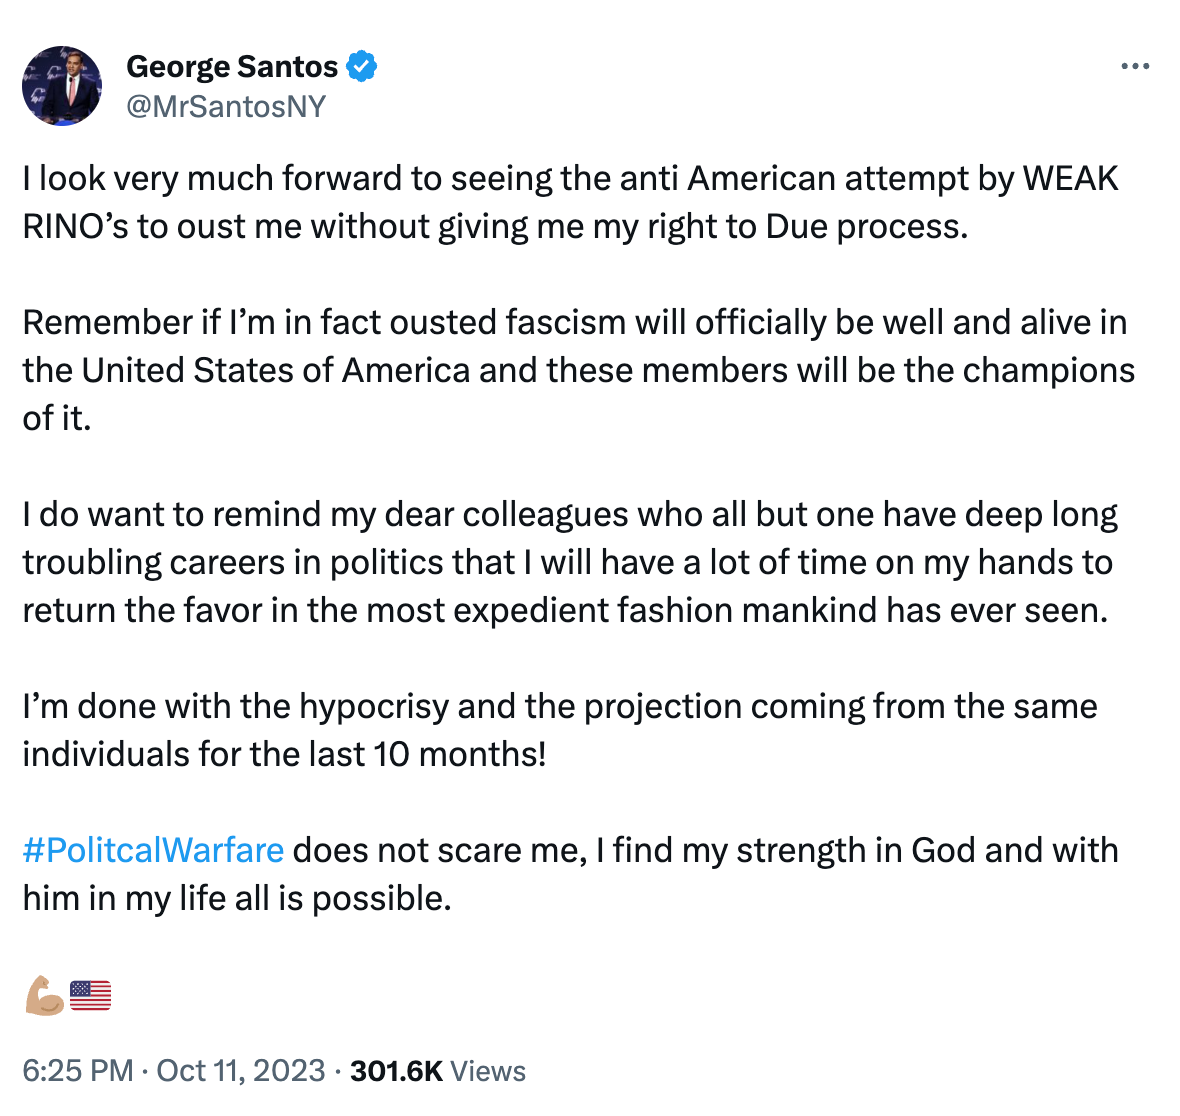 Santos tweet: “I look very much forward to seeing the anti American attempt by WEAK RINO’s to oust me without giving me my right to Due process. Remember if I’m in fact ousted fascism will officially be well and alive in the United States of America and these members will be the champions of it. I do want to remind my dear colleagues who all but one have deep long troubling careers in politics that I will have a lot of time on my hands to return the favor in the most expedient fashion mankind has ever seen. I’m done with the hypocrisy and the projection coming from the same individuals for the last 10 months!   “#PolitcalWarfare does not scare me, I find my strength in God and with him in my life all is possible.”